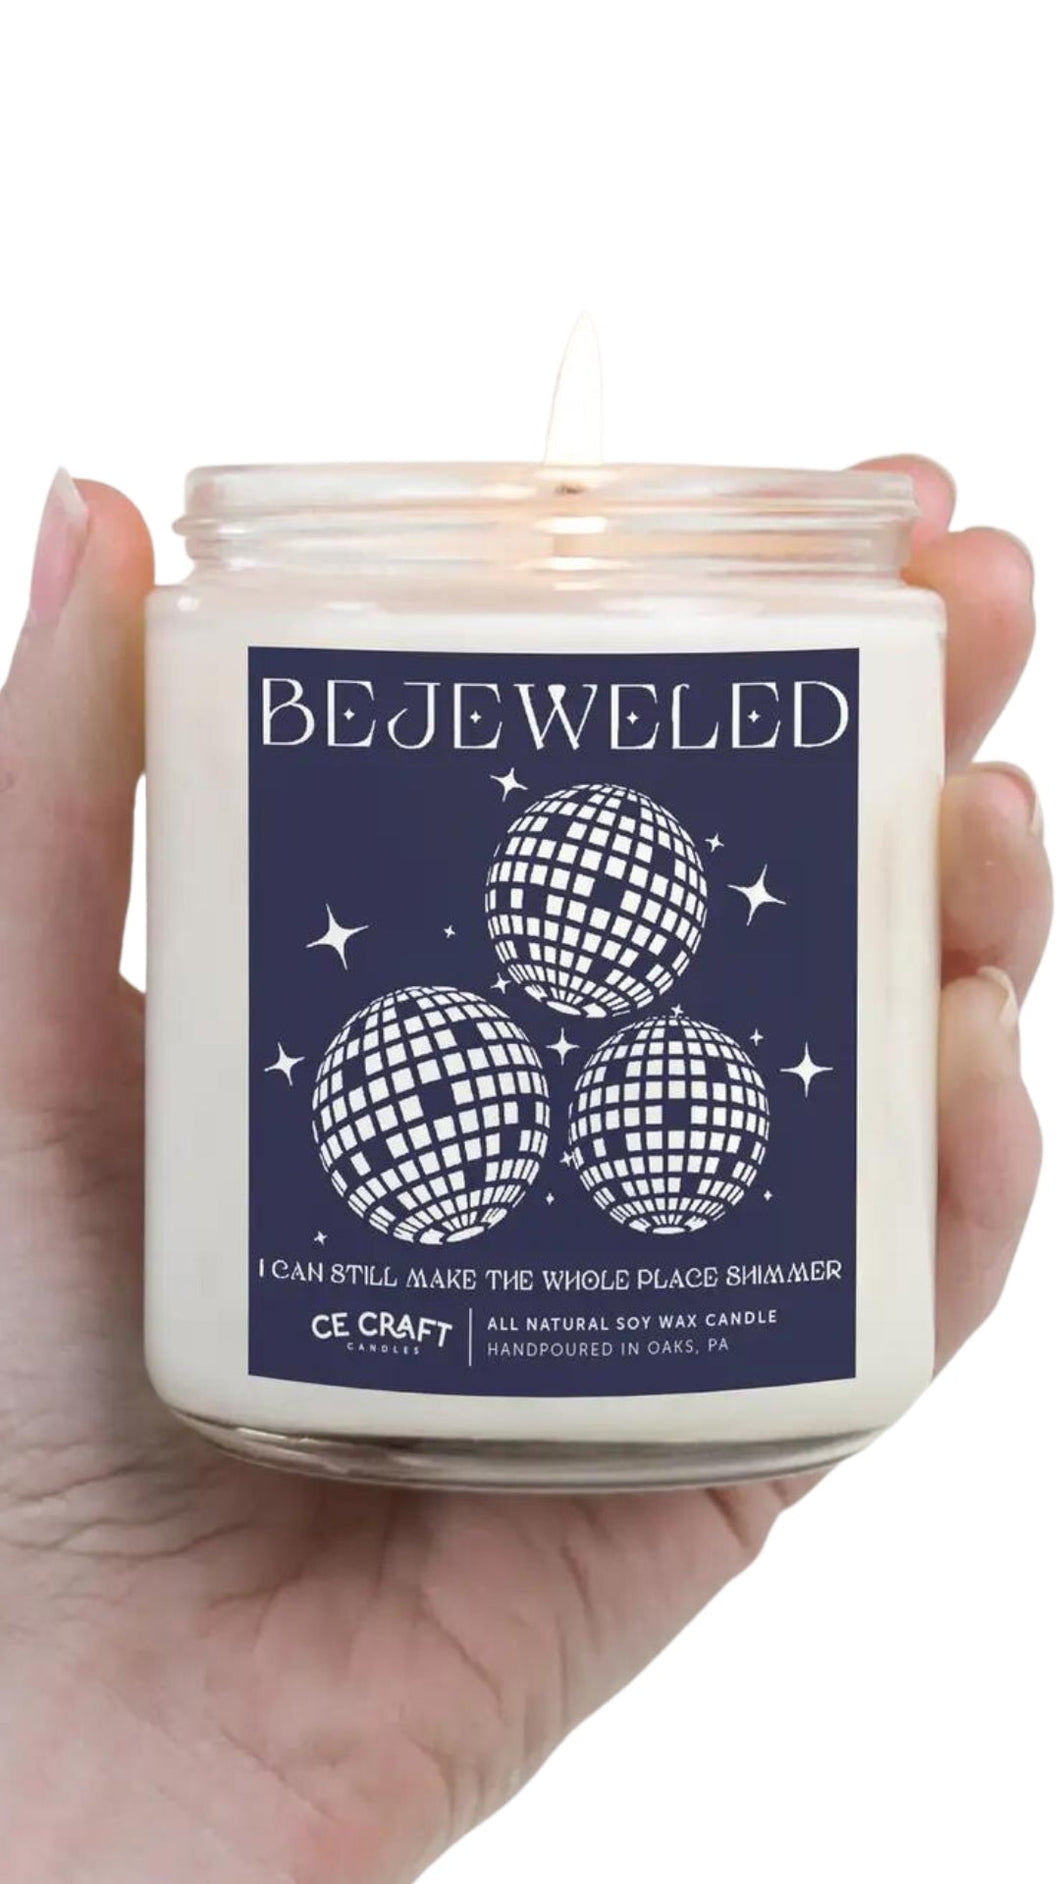 Bejeweled Candle